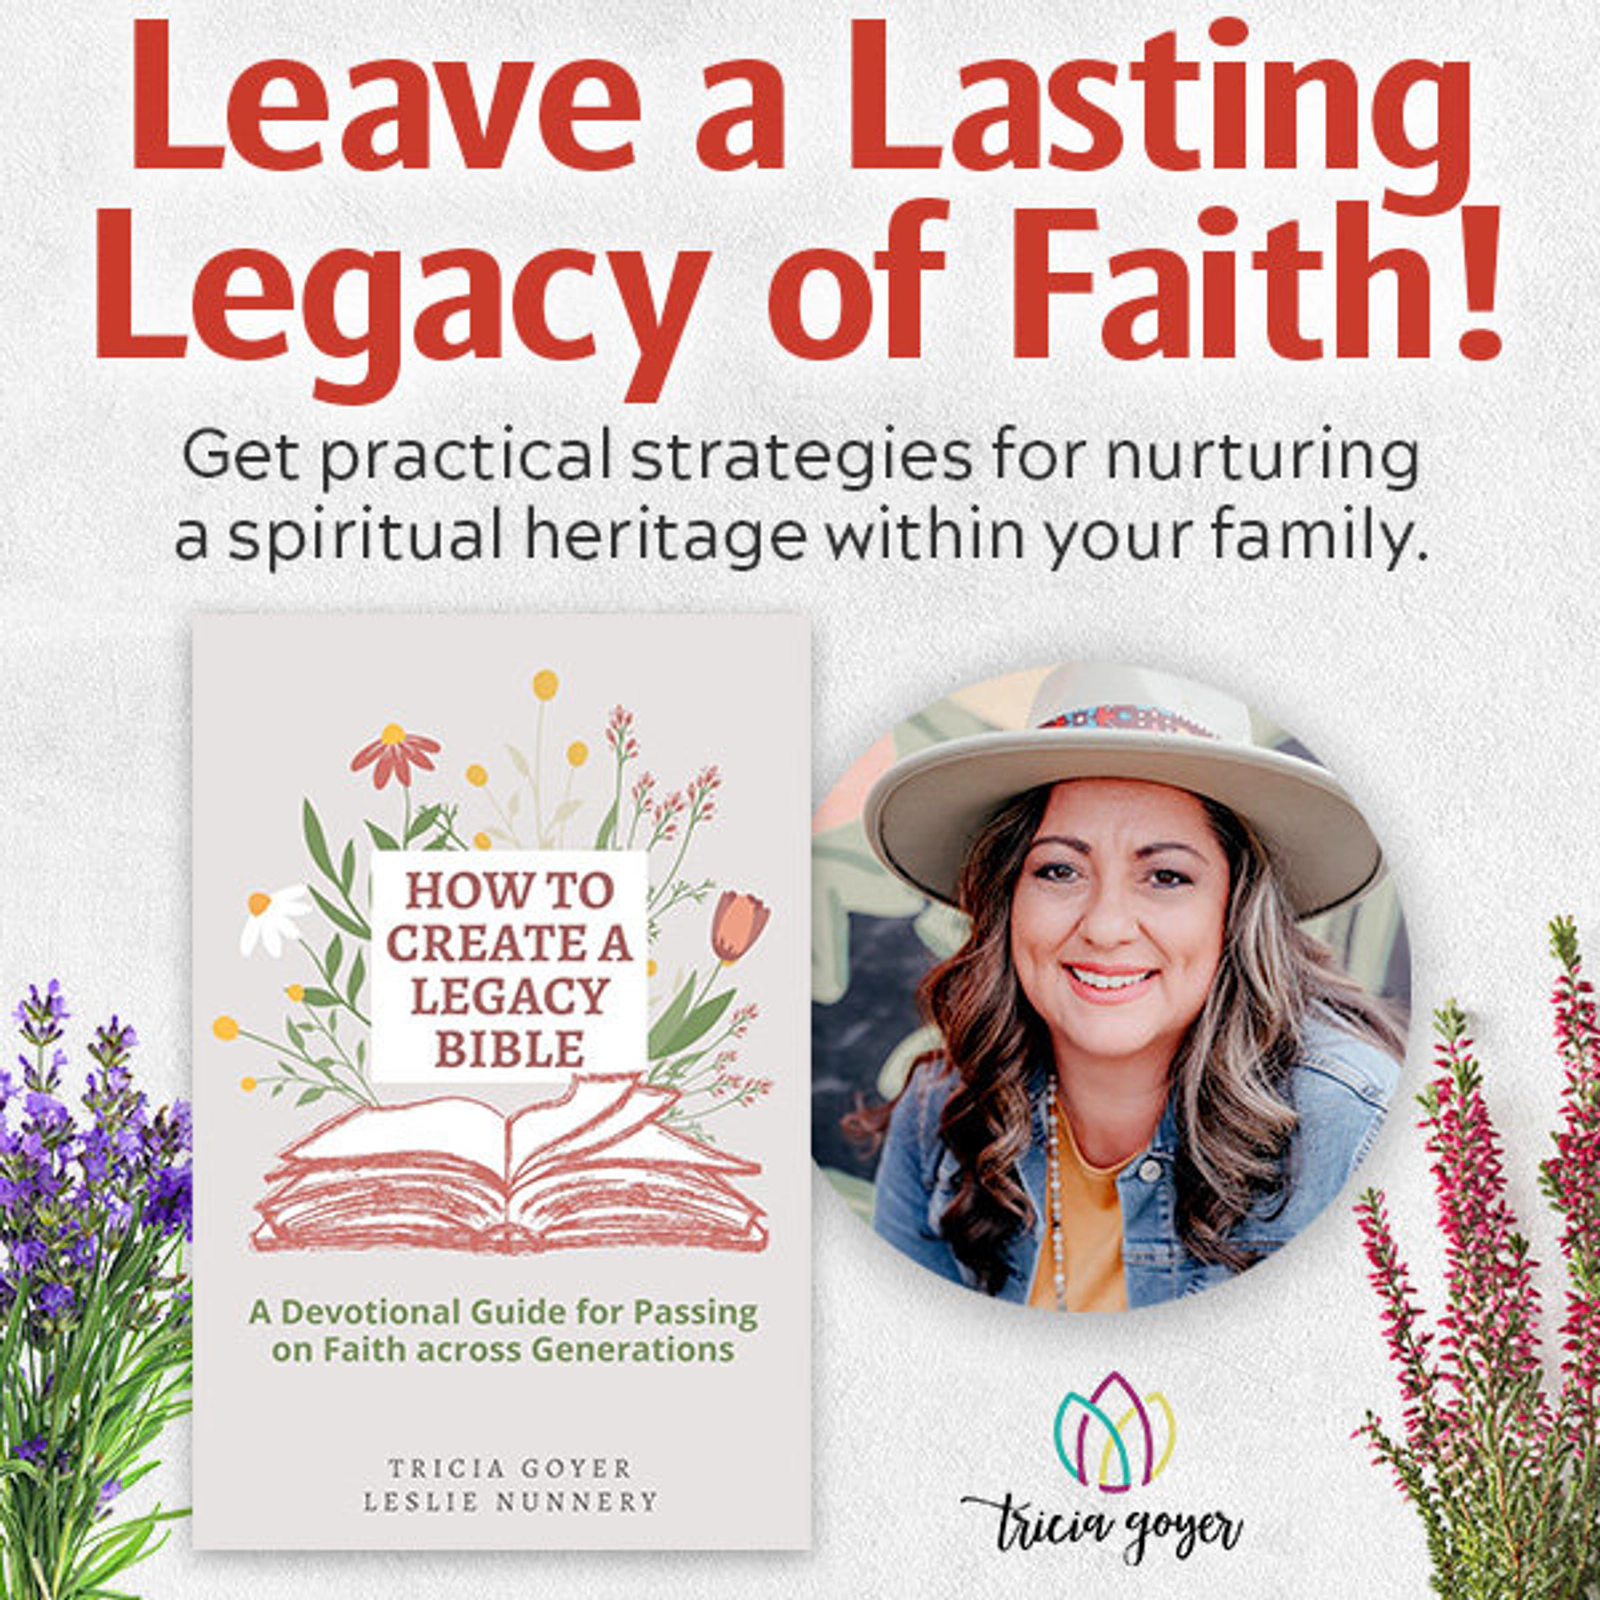 How to Create a Legacy Bible Book Giveaway